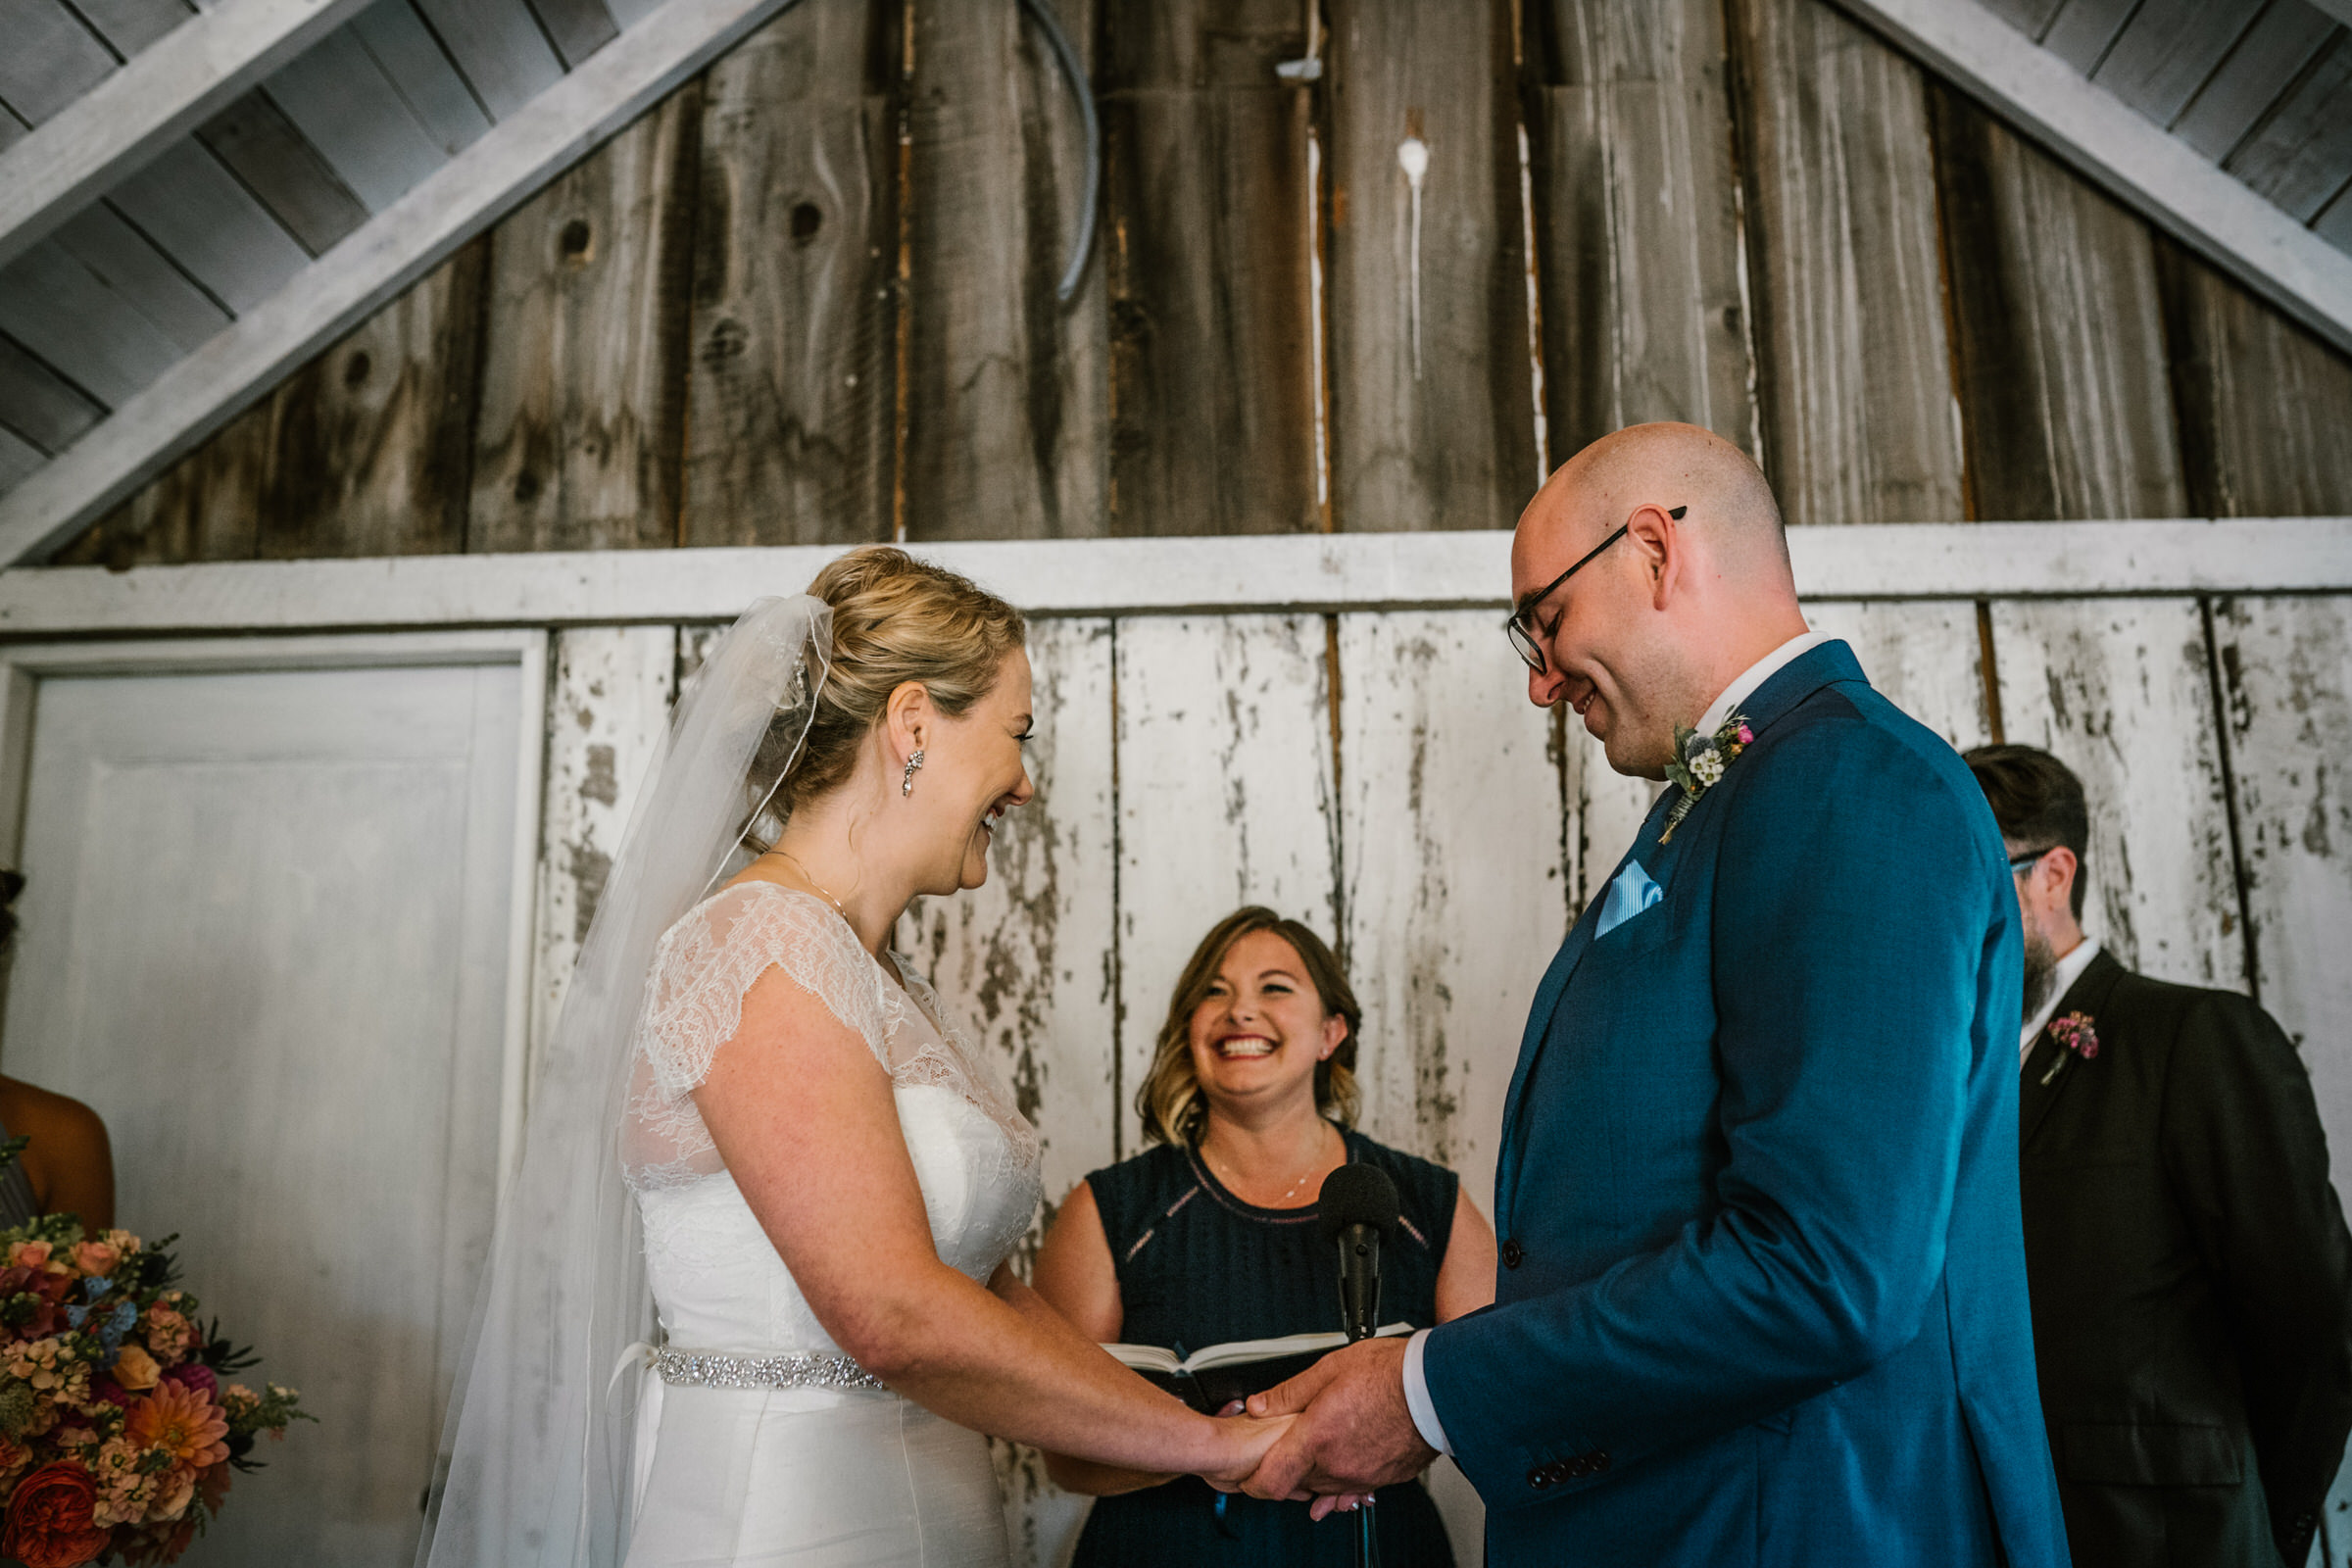 Wayfarer Whidbey Island Wedding: Sara joins Joe at the front as her brother and sister-in-law officiate the wedding